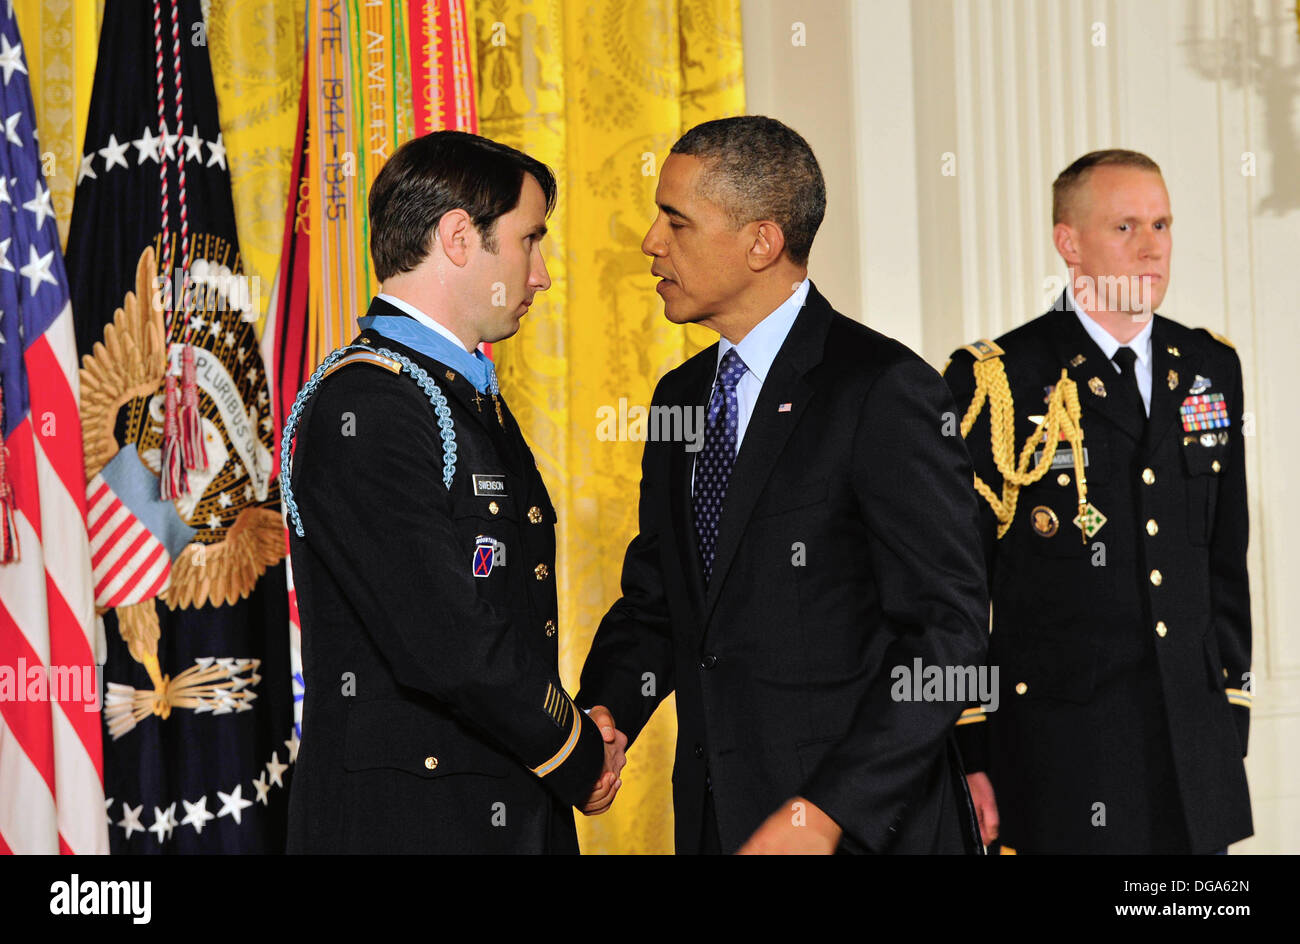 US President Barack Obama congratulates former US Army Capt. William D. Swenson after presenting him with the Medal of Honor during a ceremony in the East Room of the White House October 15, 2013 in Washington, DC. The Medal of Honor is the nation's highest military honor. Stock Photo